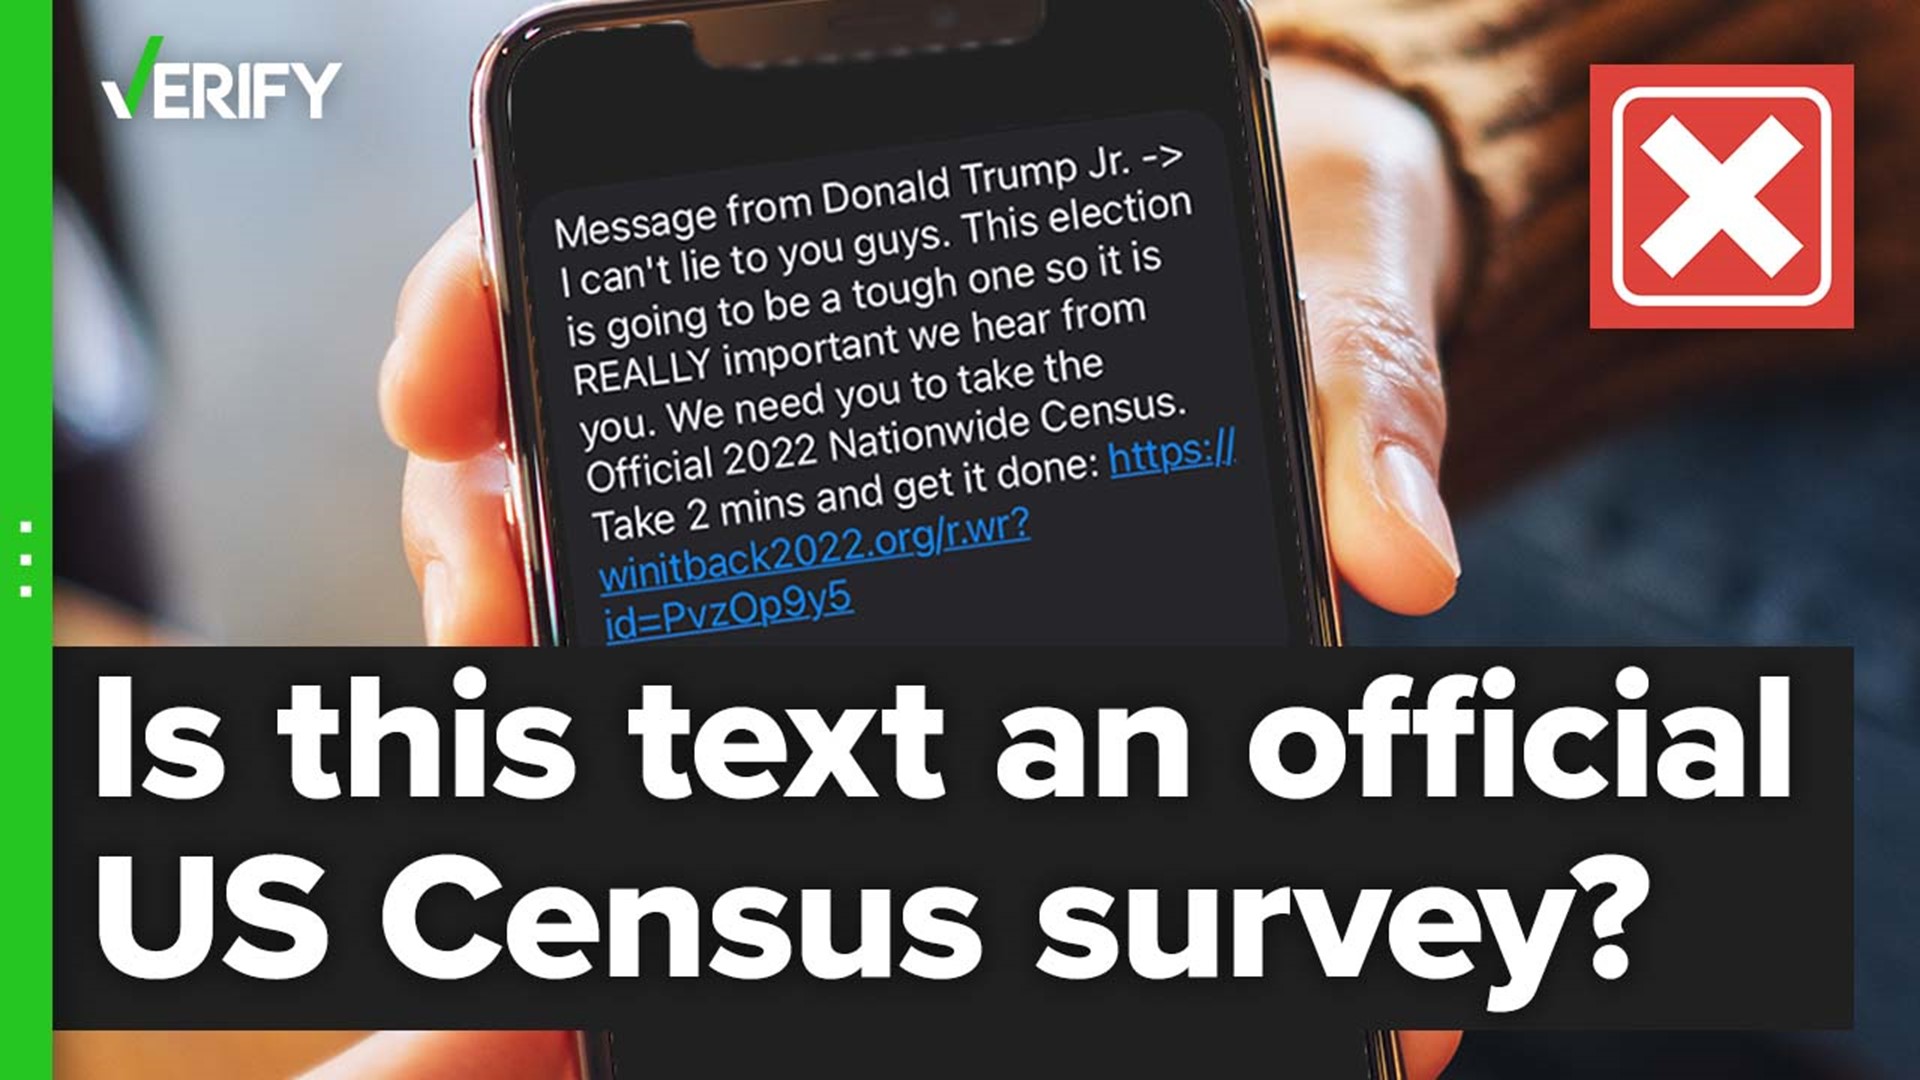 U.S. Census messages are sent from the number 39242 and only direct people to .gov websites.